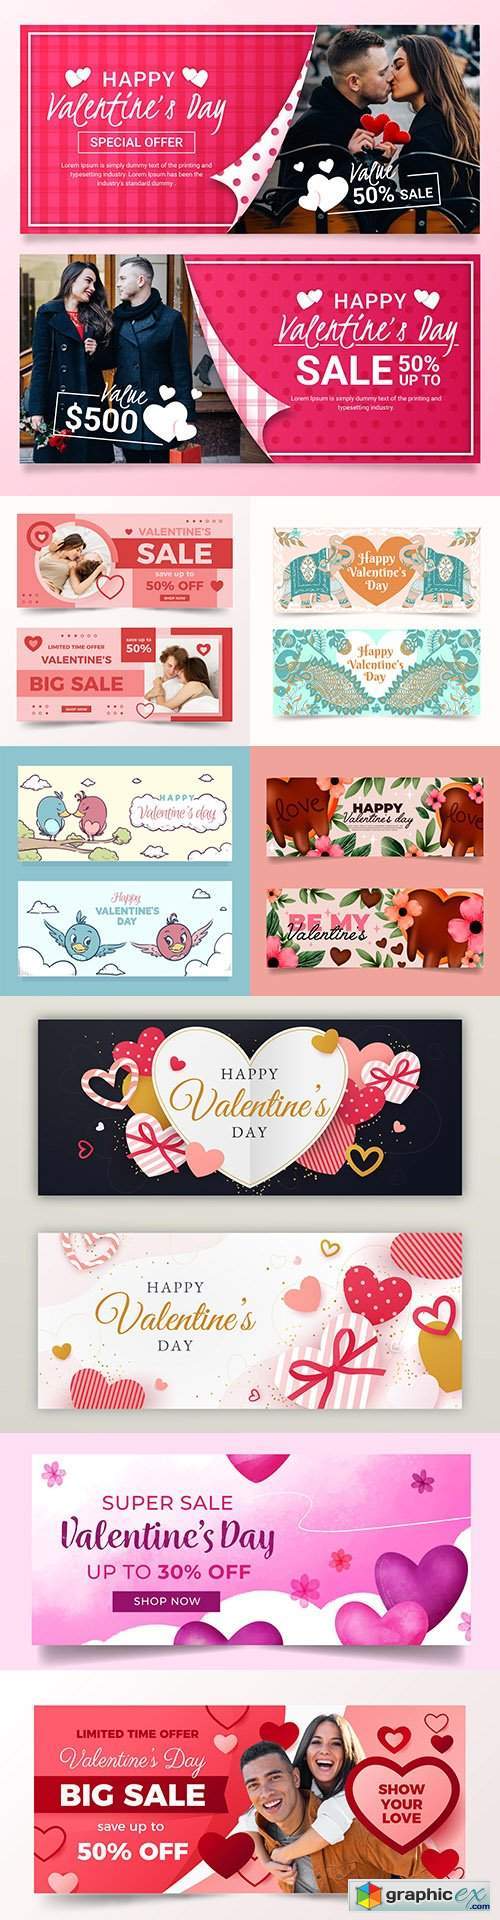 Valentine's Day banner and menu design template 2